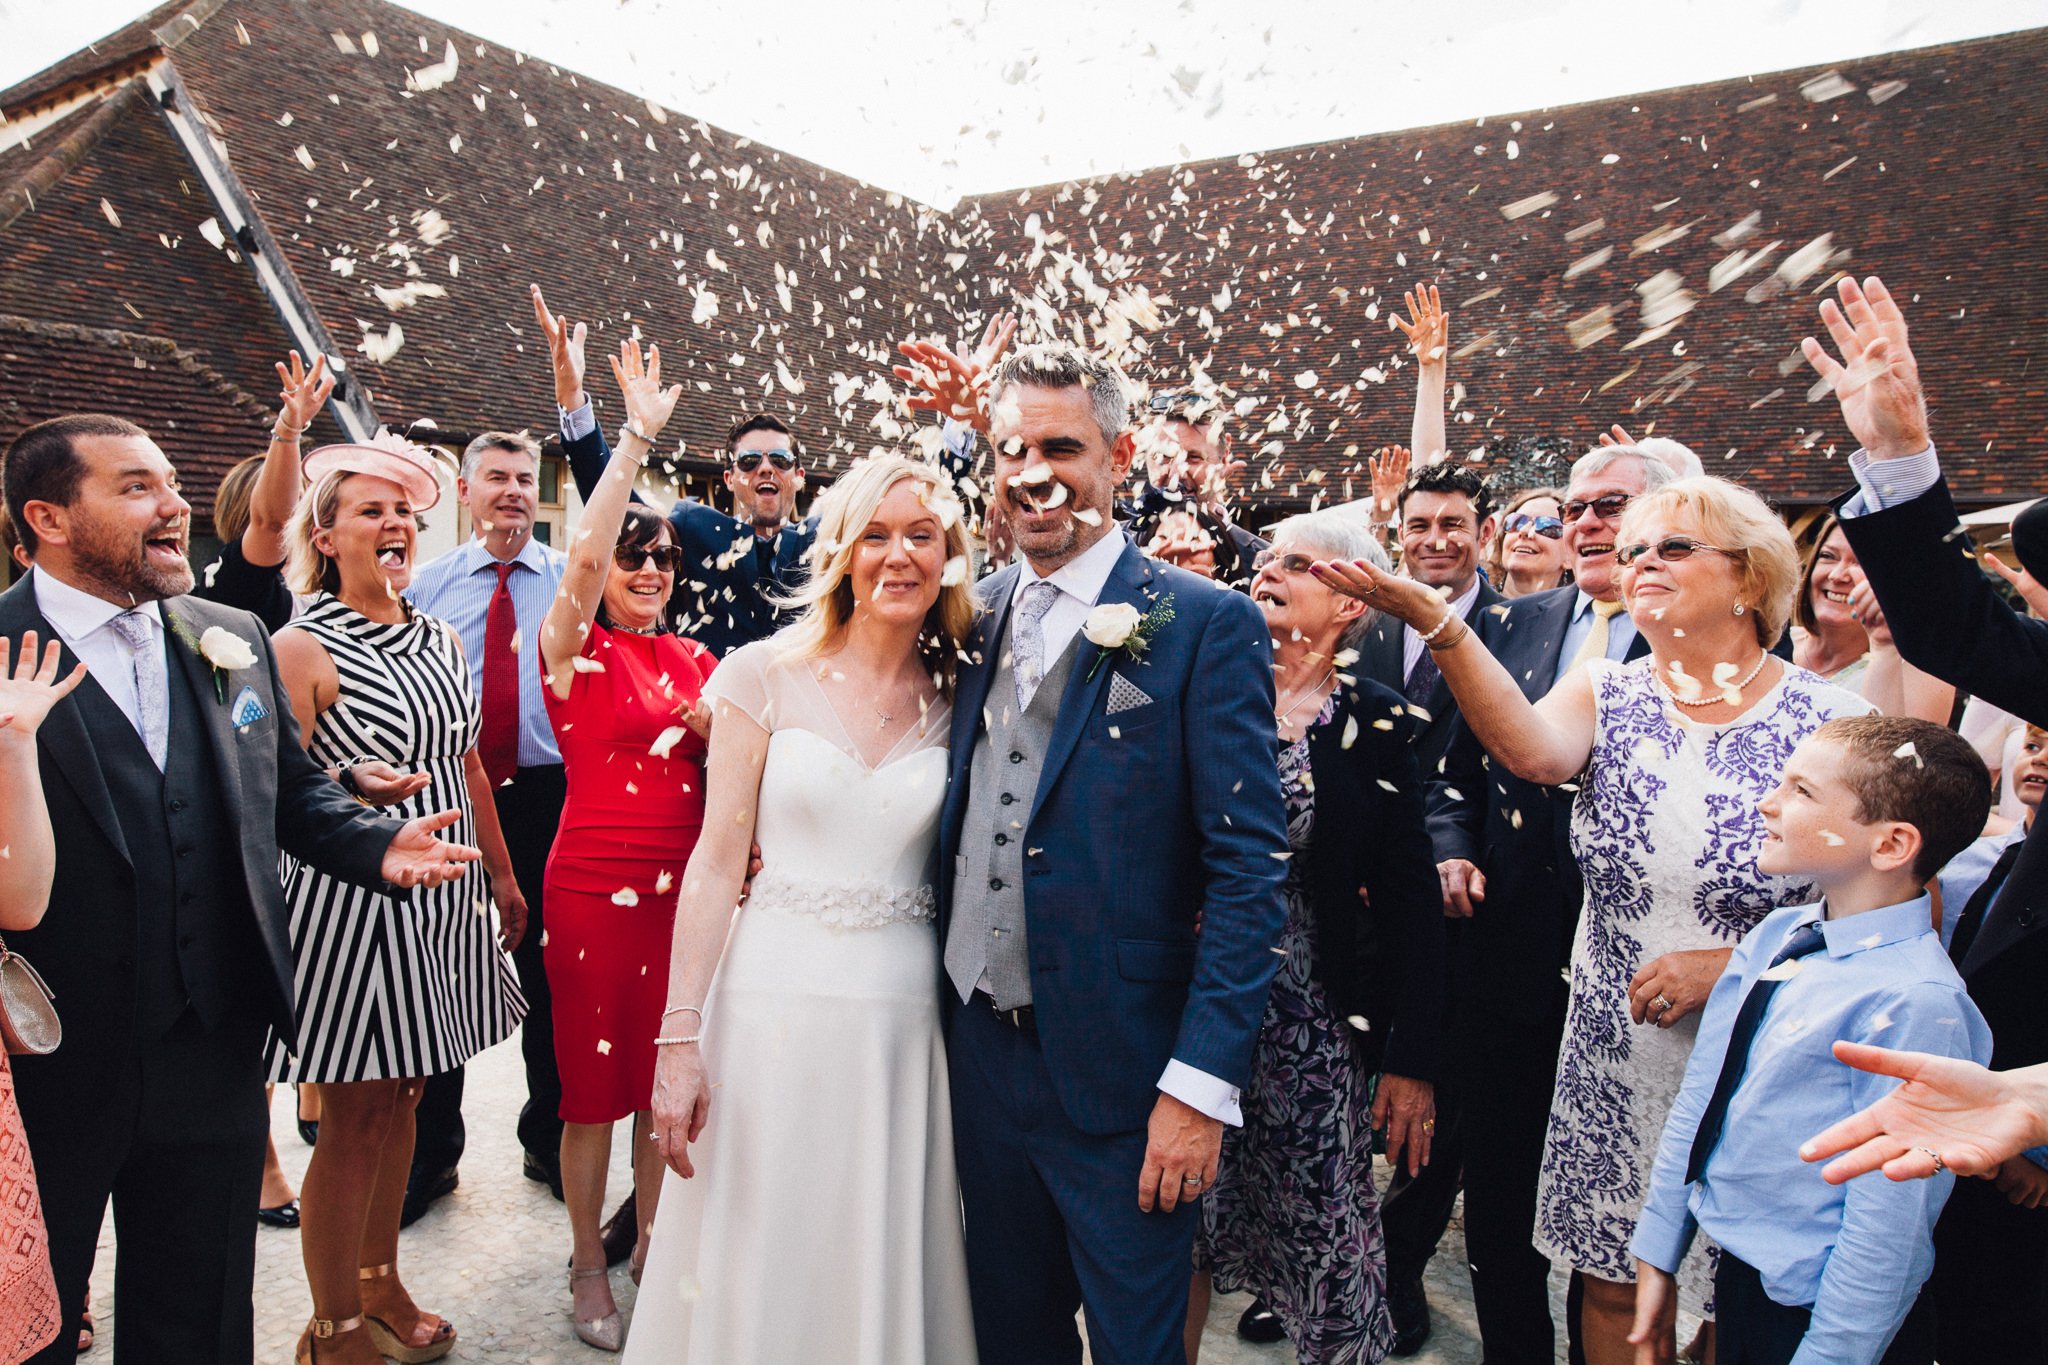  Wedding guests throw confetti at Bride and Groom at Rivervale Barn 